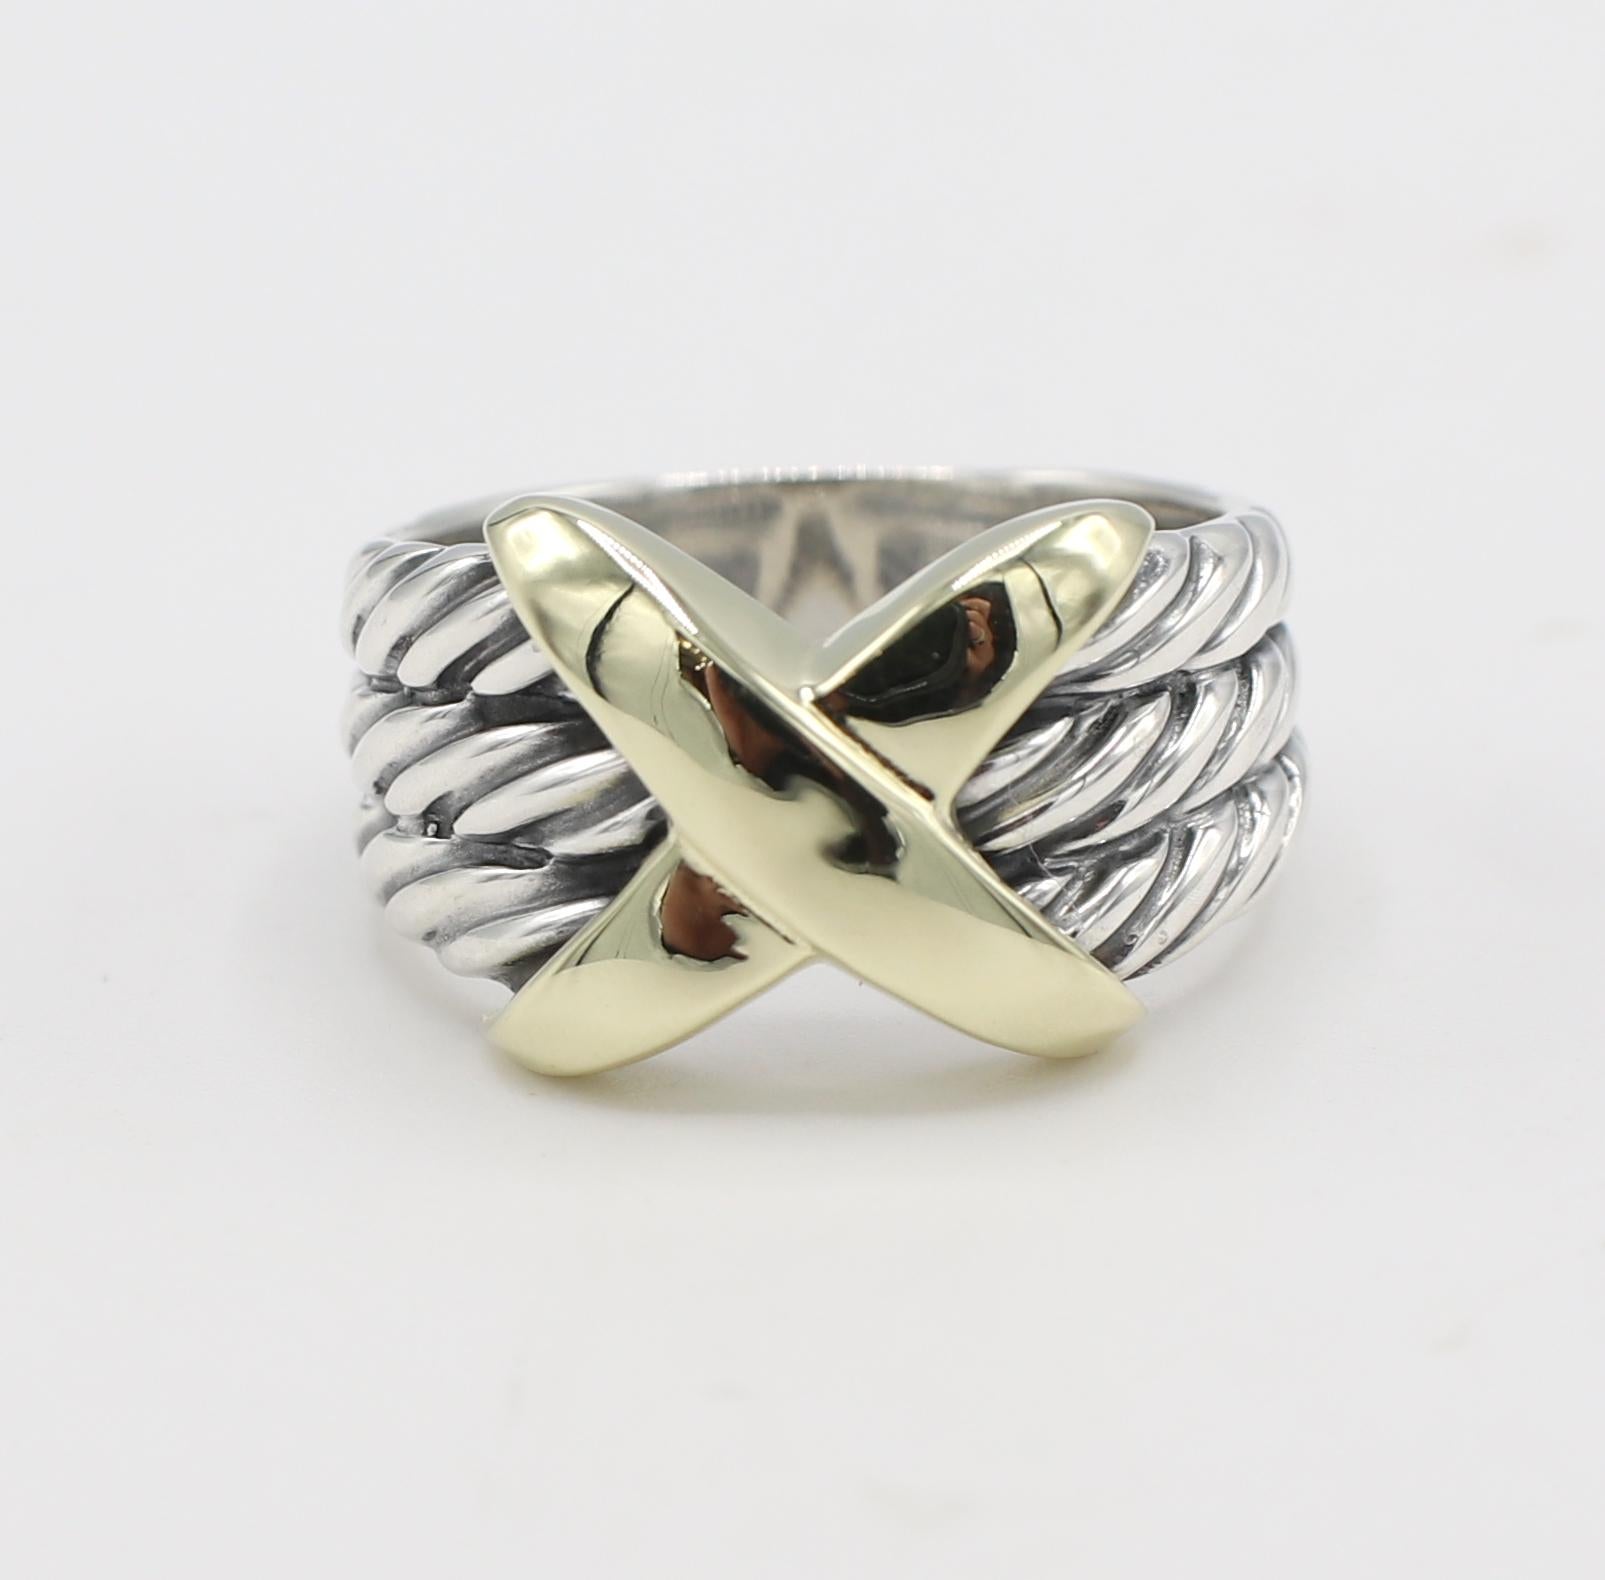 David Yurman Sterling Silver & Gold Cable X Band Ring 
Metal: Sterling silver & 14k yellow gold
Weight: 6.27 grams
Size:  6.5
Width: 5.5 - 12mm
